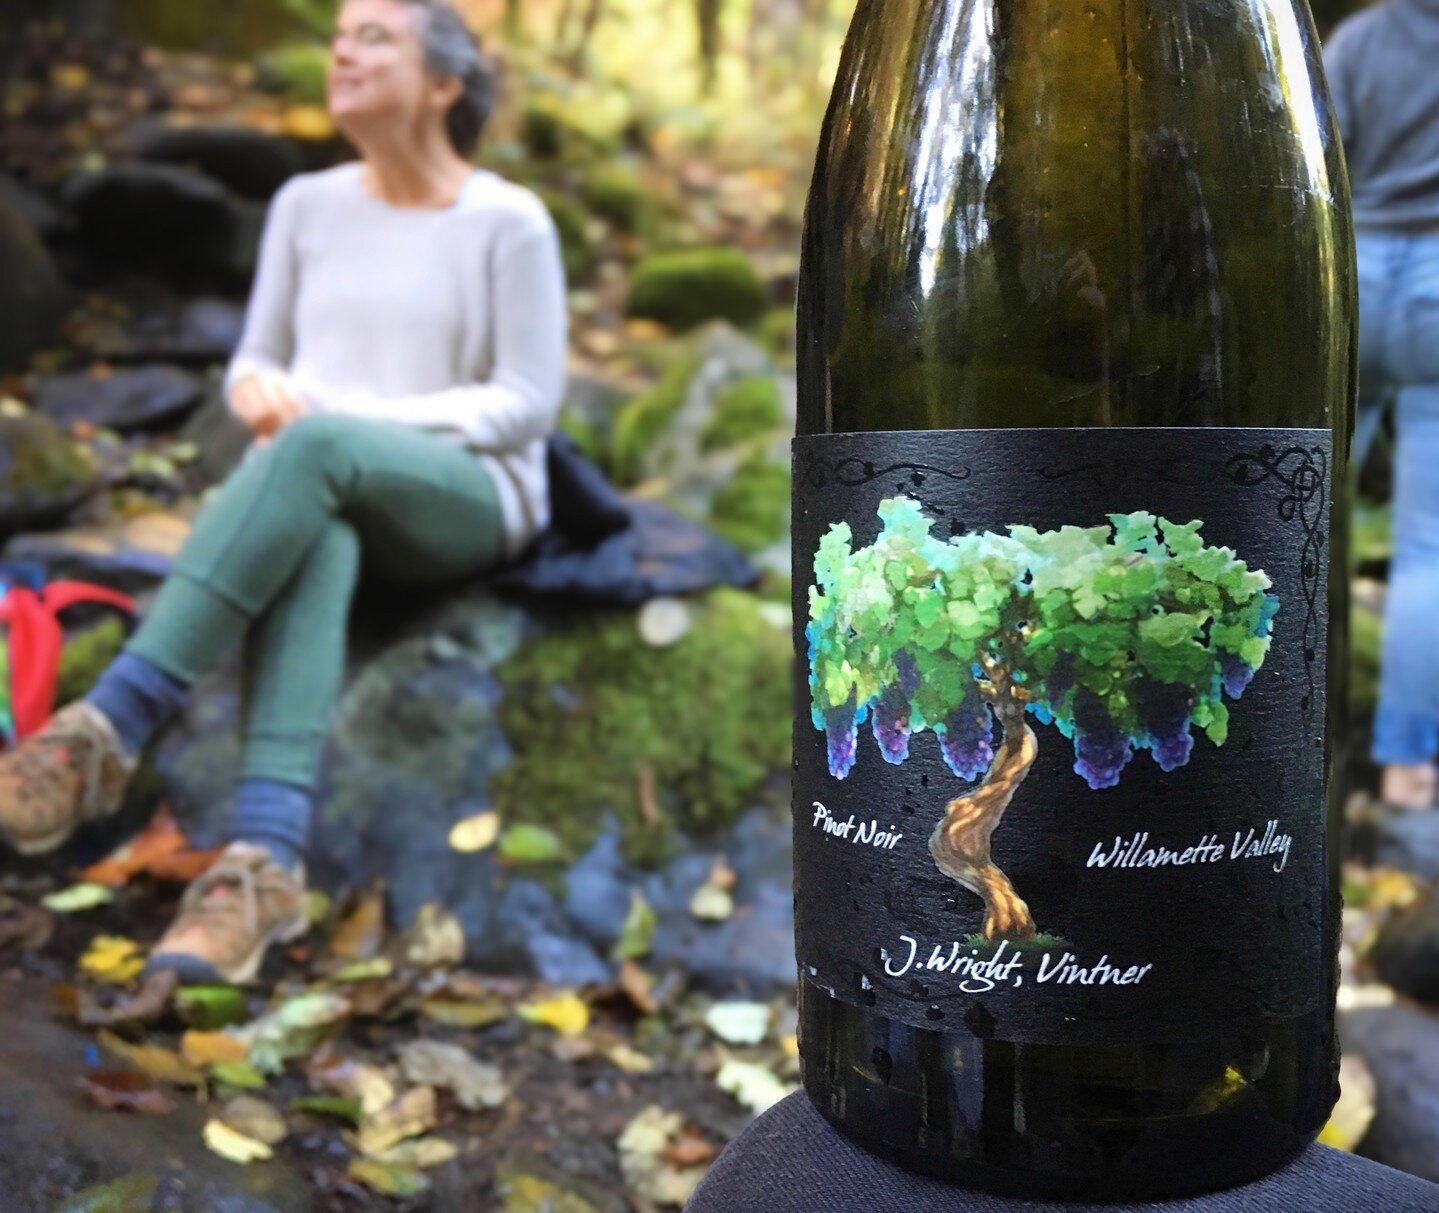 Forest bathing 💚 We understand

Our wine is crafted for spirited forest bathers, hikers and adventurers of all varieties.

#oregonhiker #forestbathing #wineoutside #oregonwine #adventurewine #oregonhiking #hiking #goodforthesoul